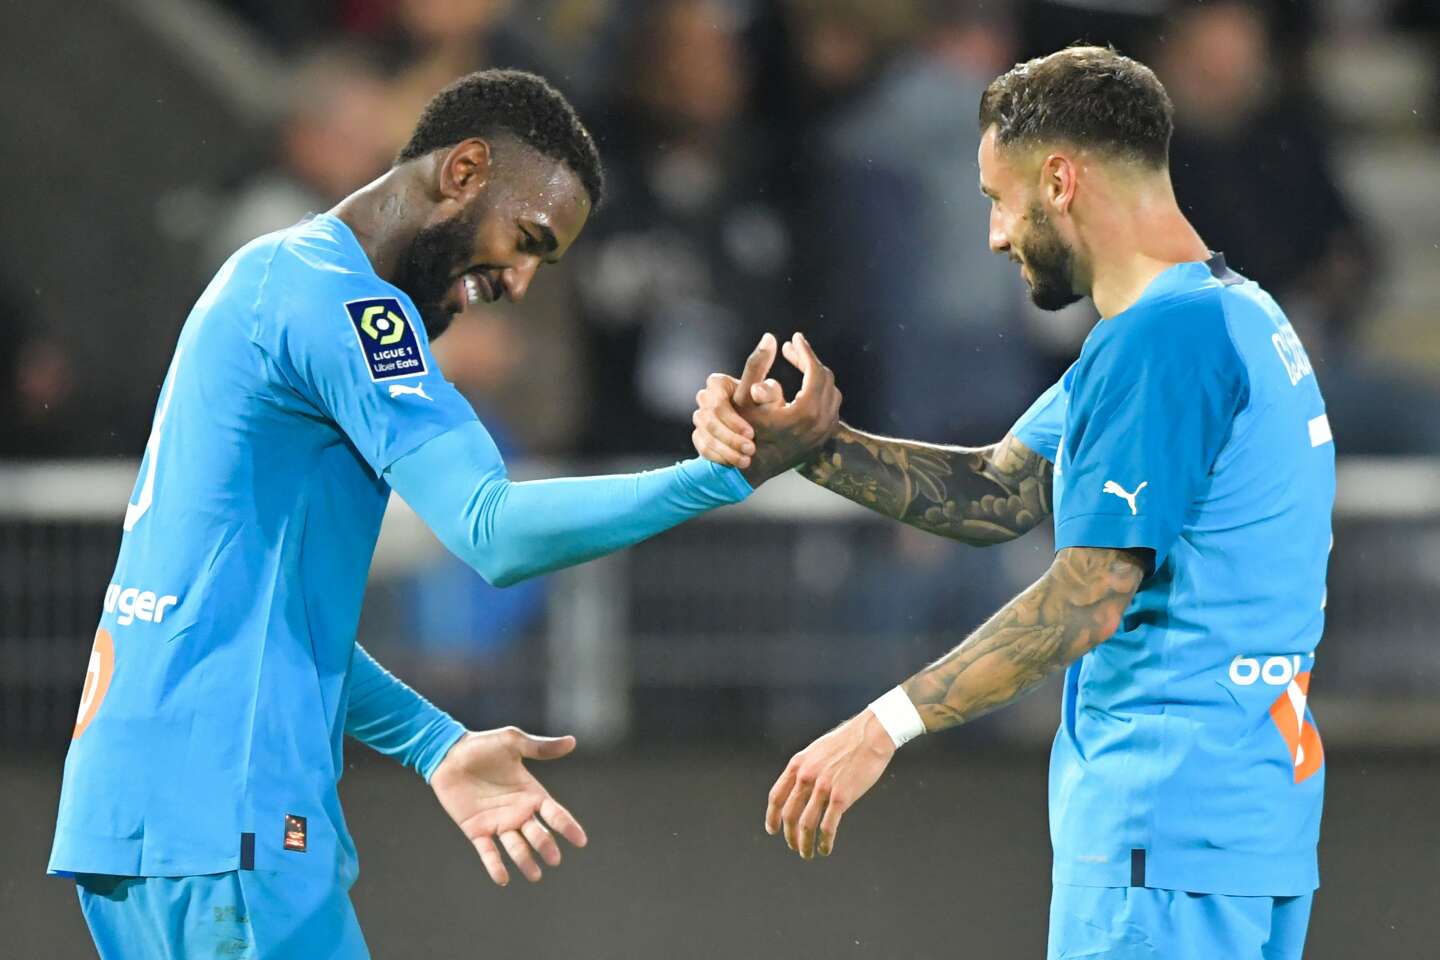 French League: Marseille ousts Angers (3-0)